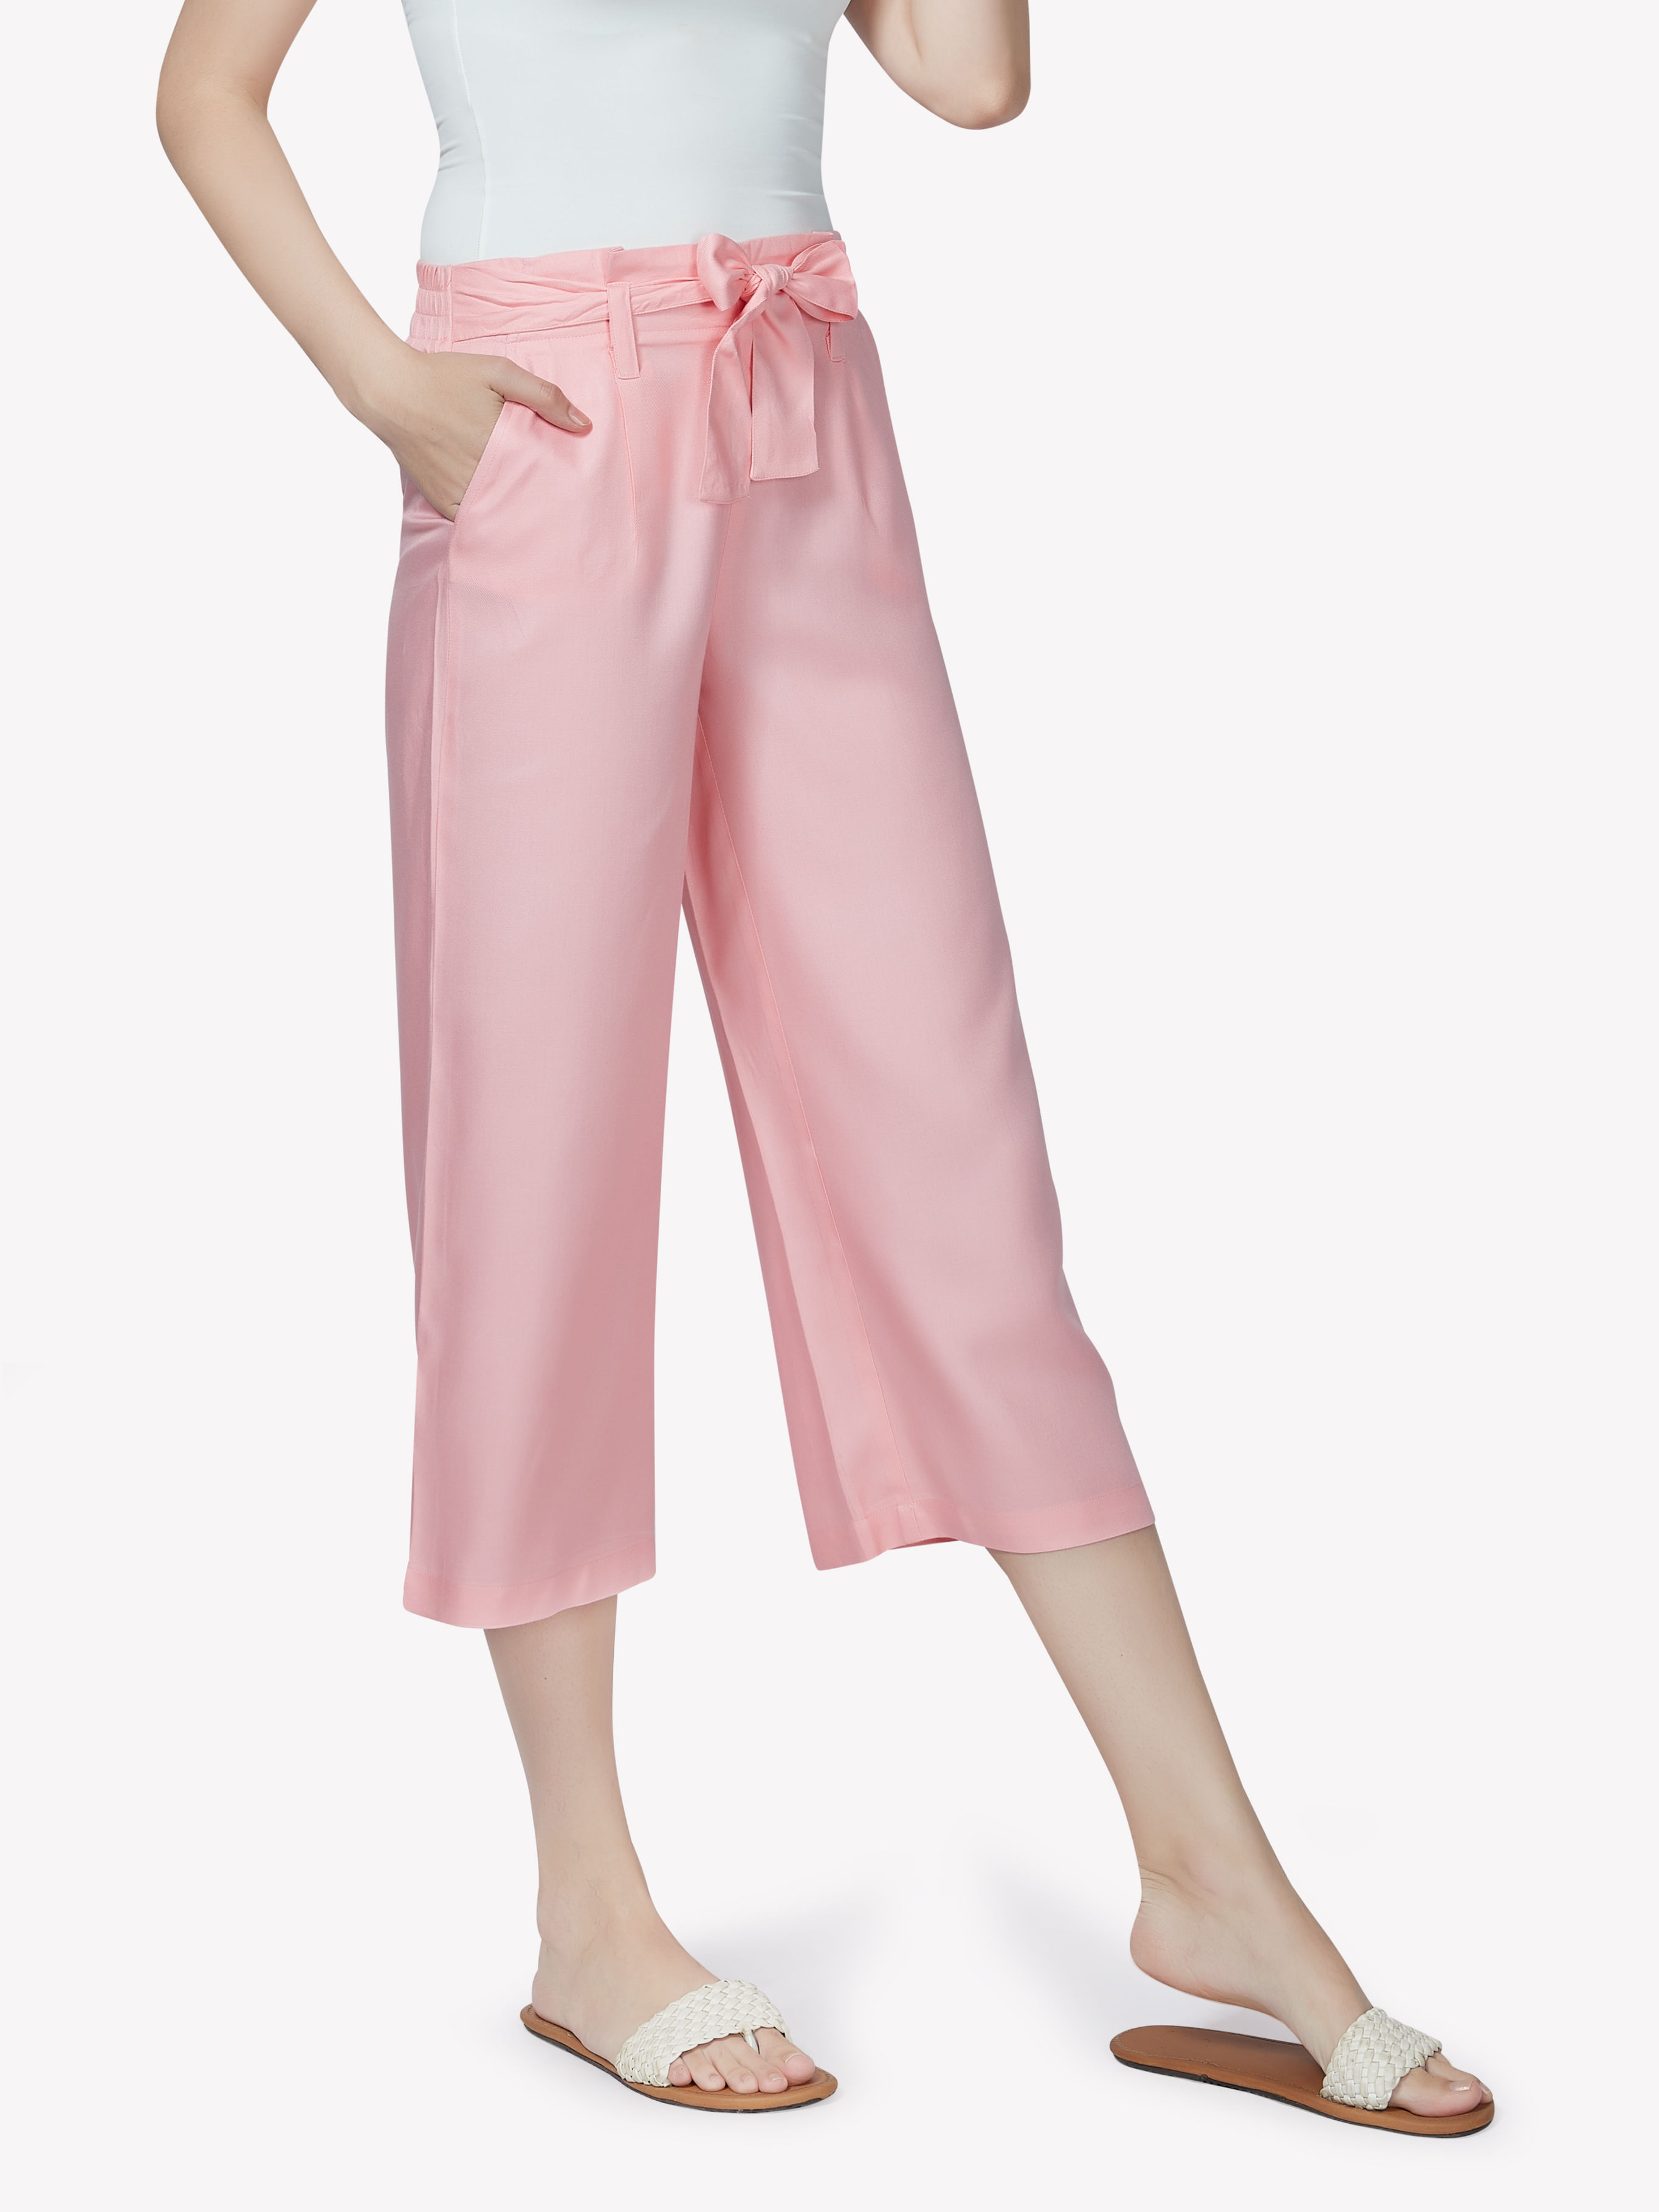 Womens Pink Palazzos: Buy Womens Pink Palazzos Online only at Pernia's  Pop-Up Shop 2024